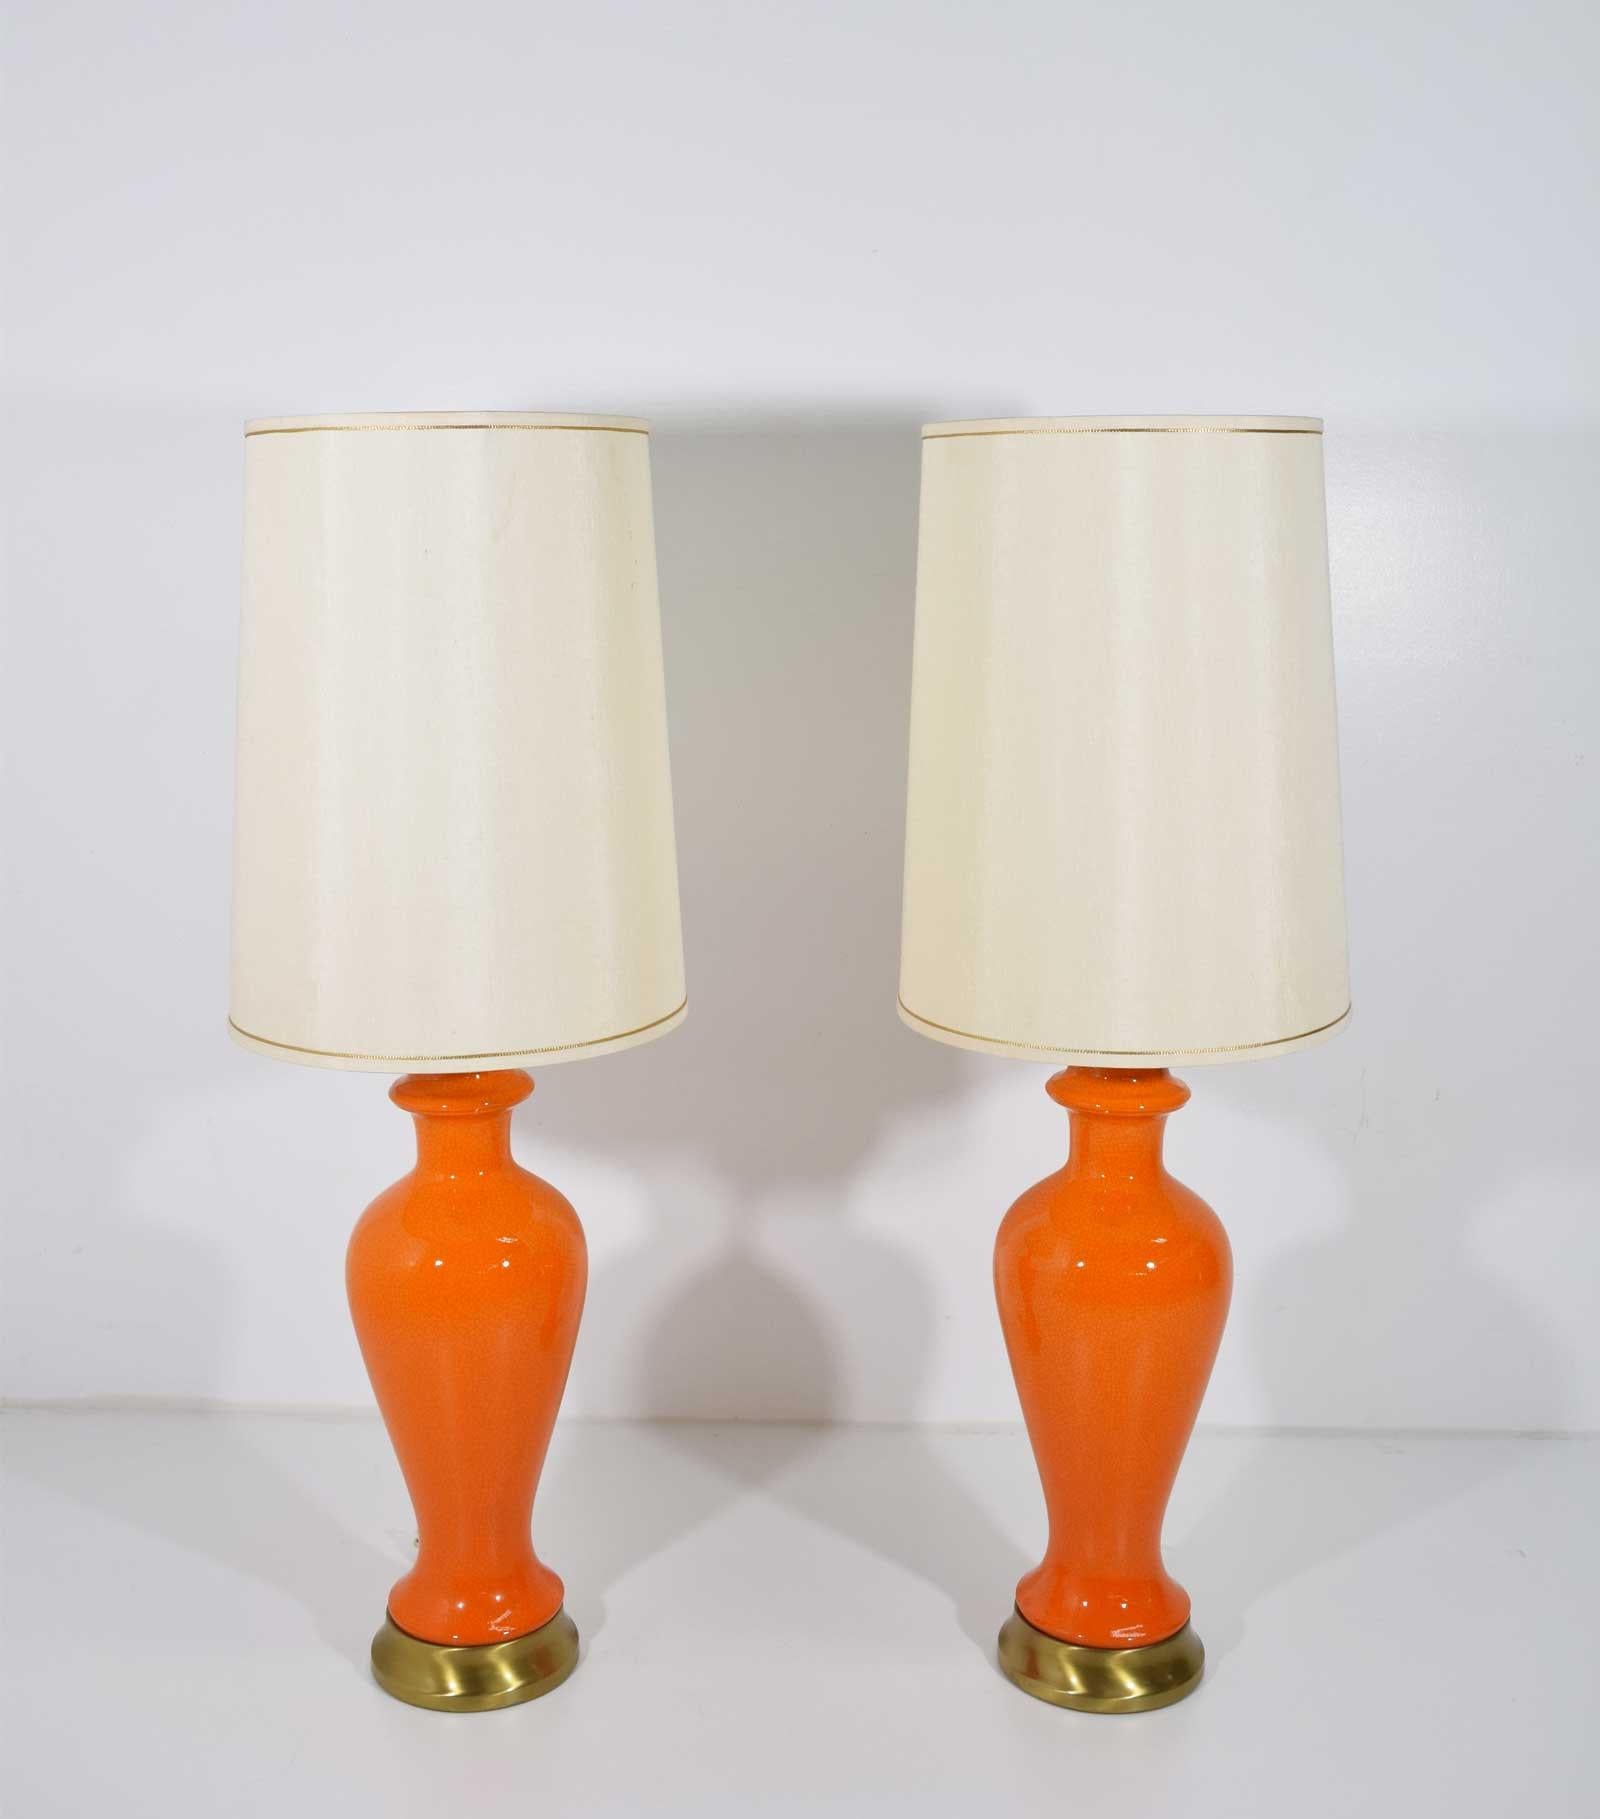 A very nice pair of Mid-Century Modern table lamps is a crackled ceramic. Bright orange. Pretty shades that look to be silk. Dimensions are to top of harp and diameter is the shade.